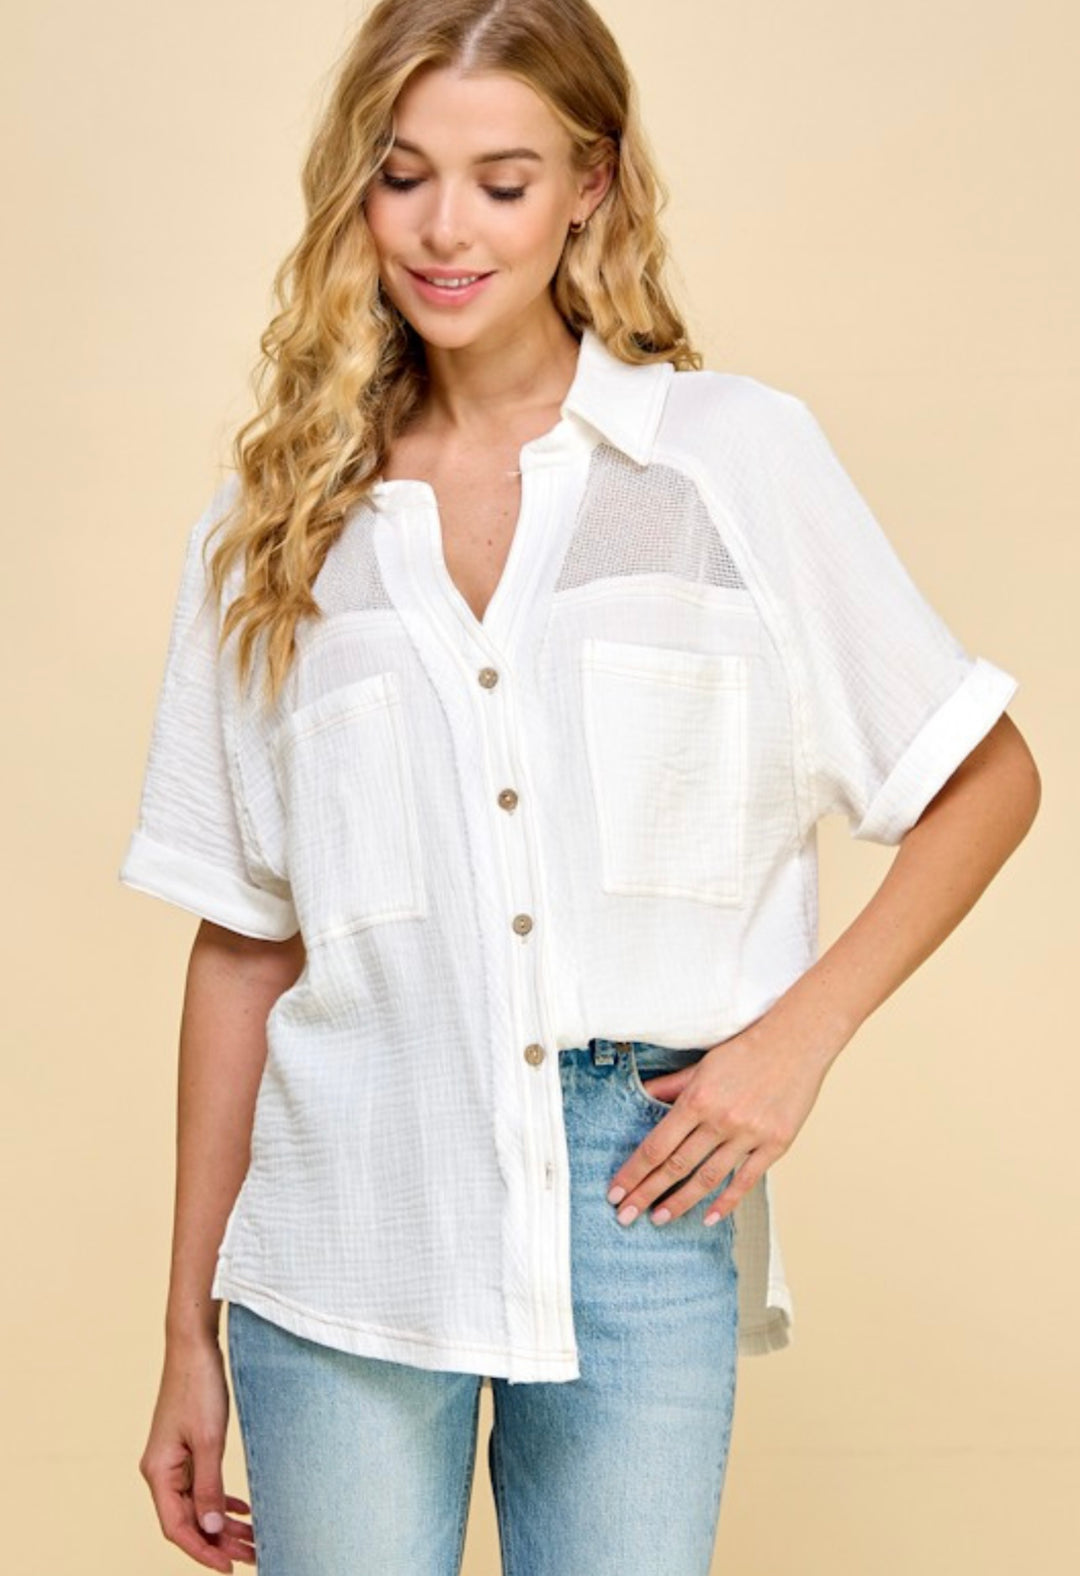 Netted Yoke Button up Shirt Off White